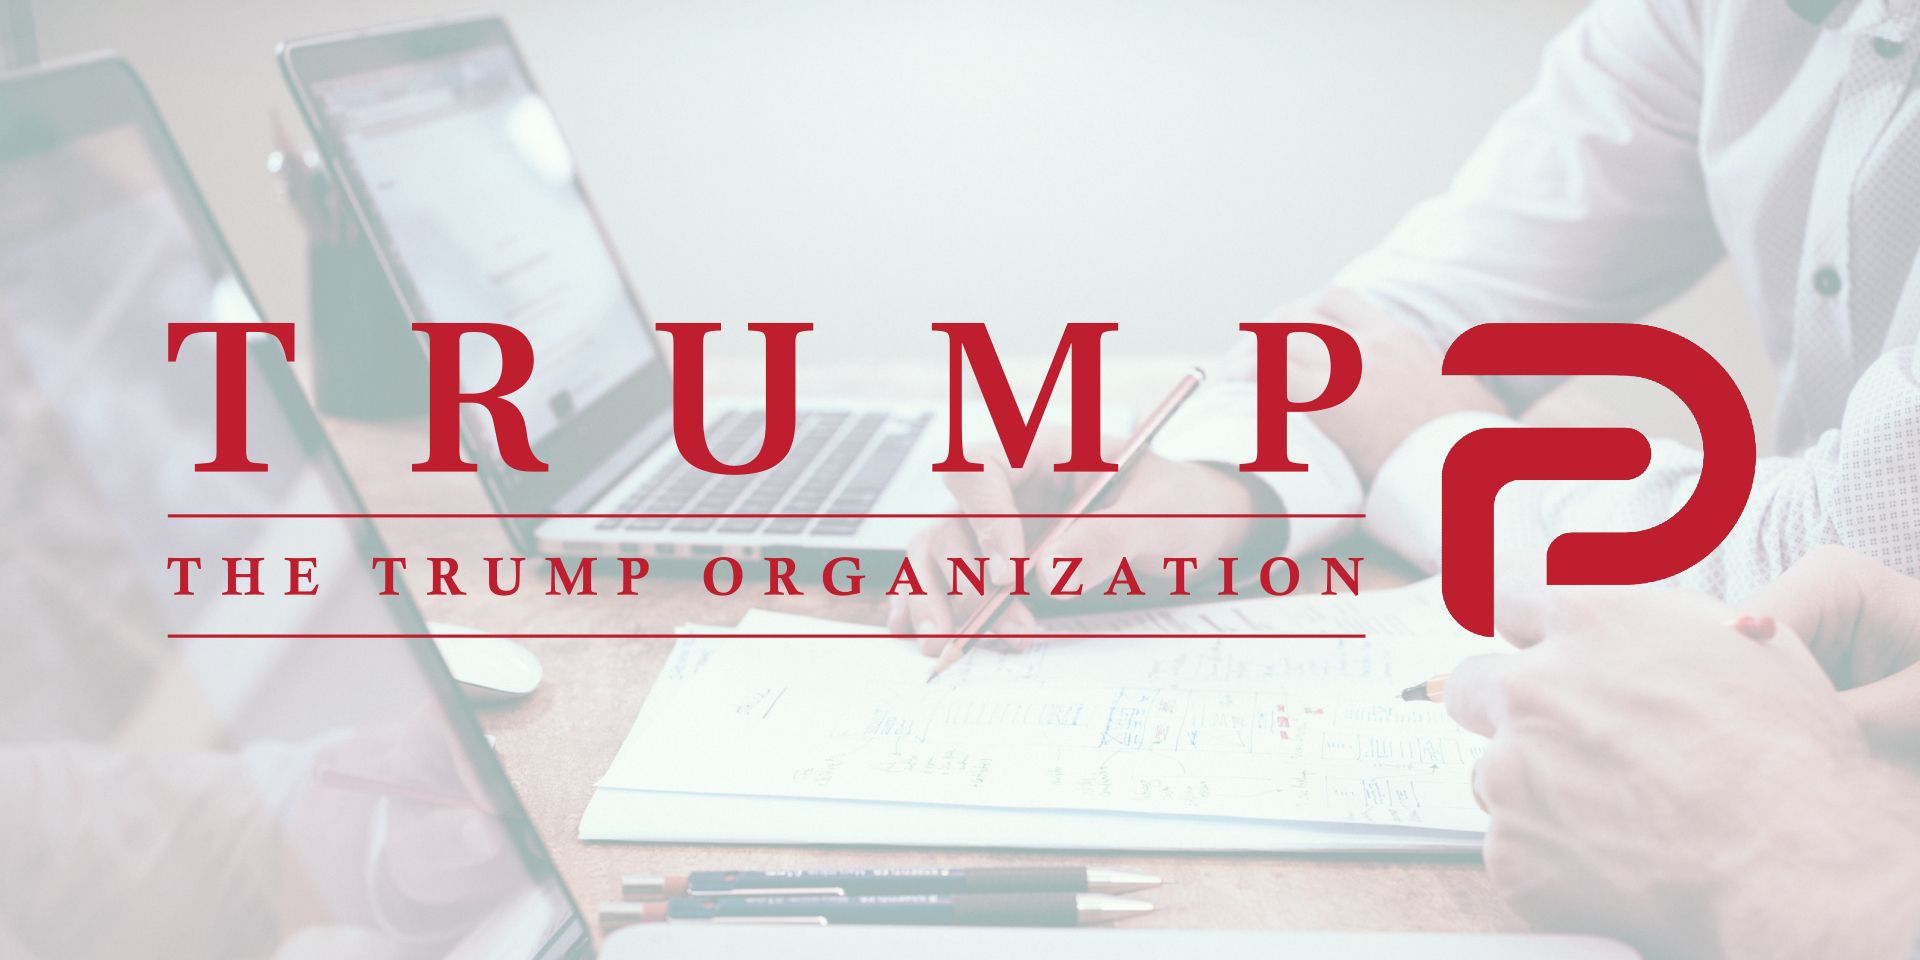 The Trump Organization and Parler logos over a business meeting background